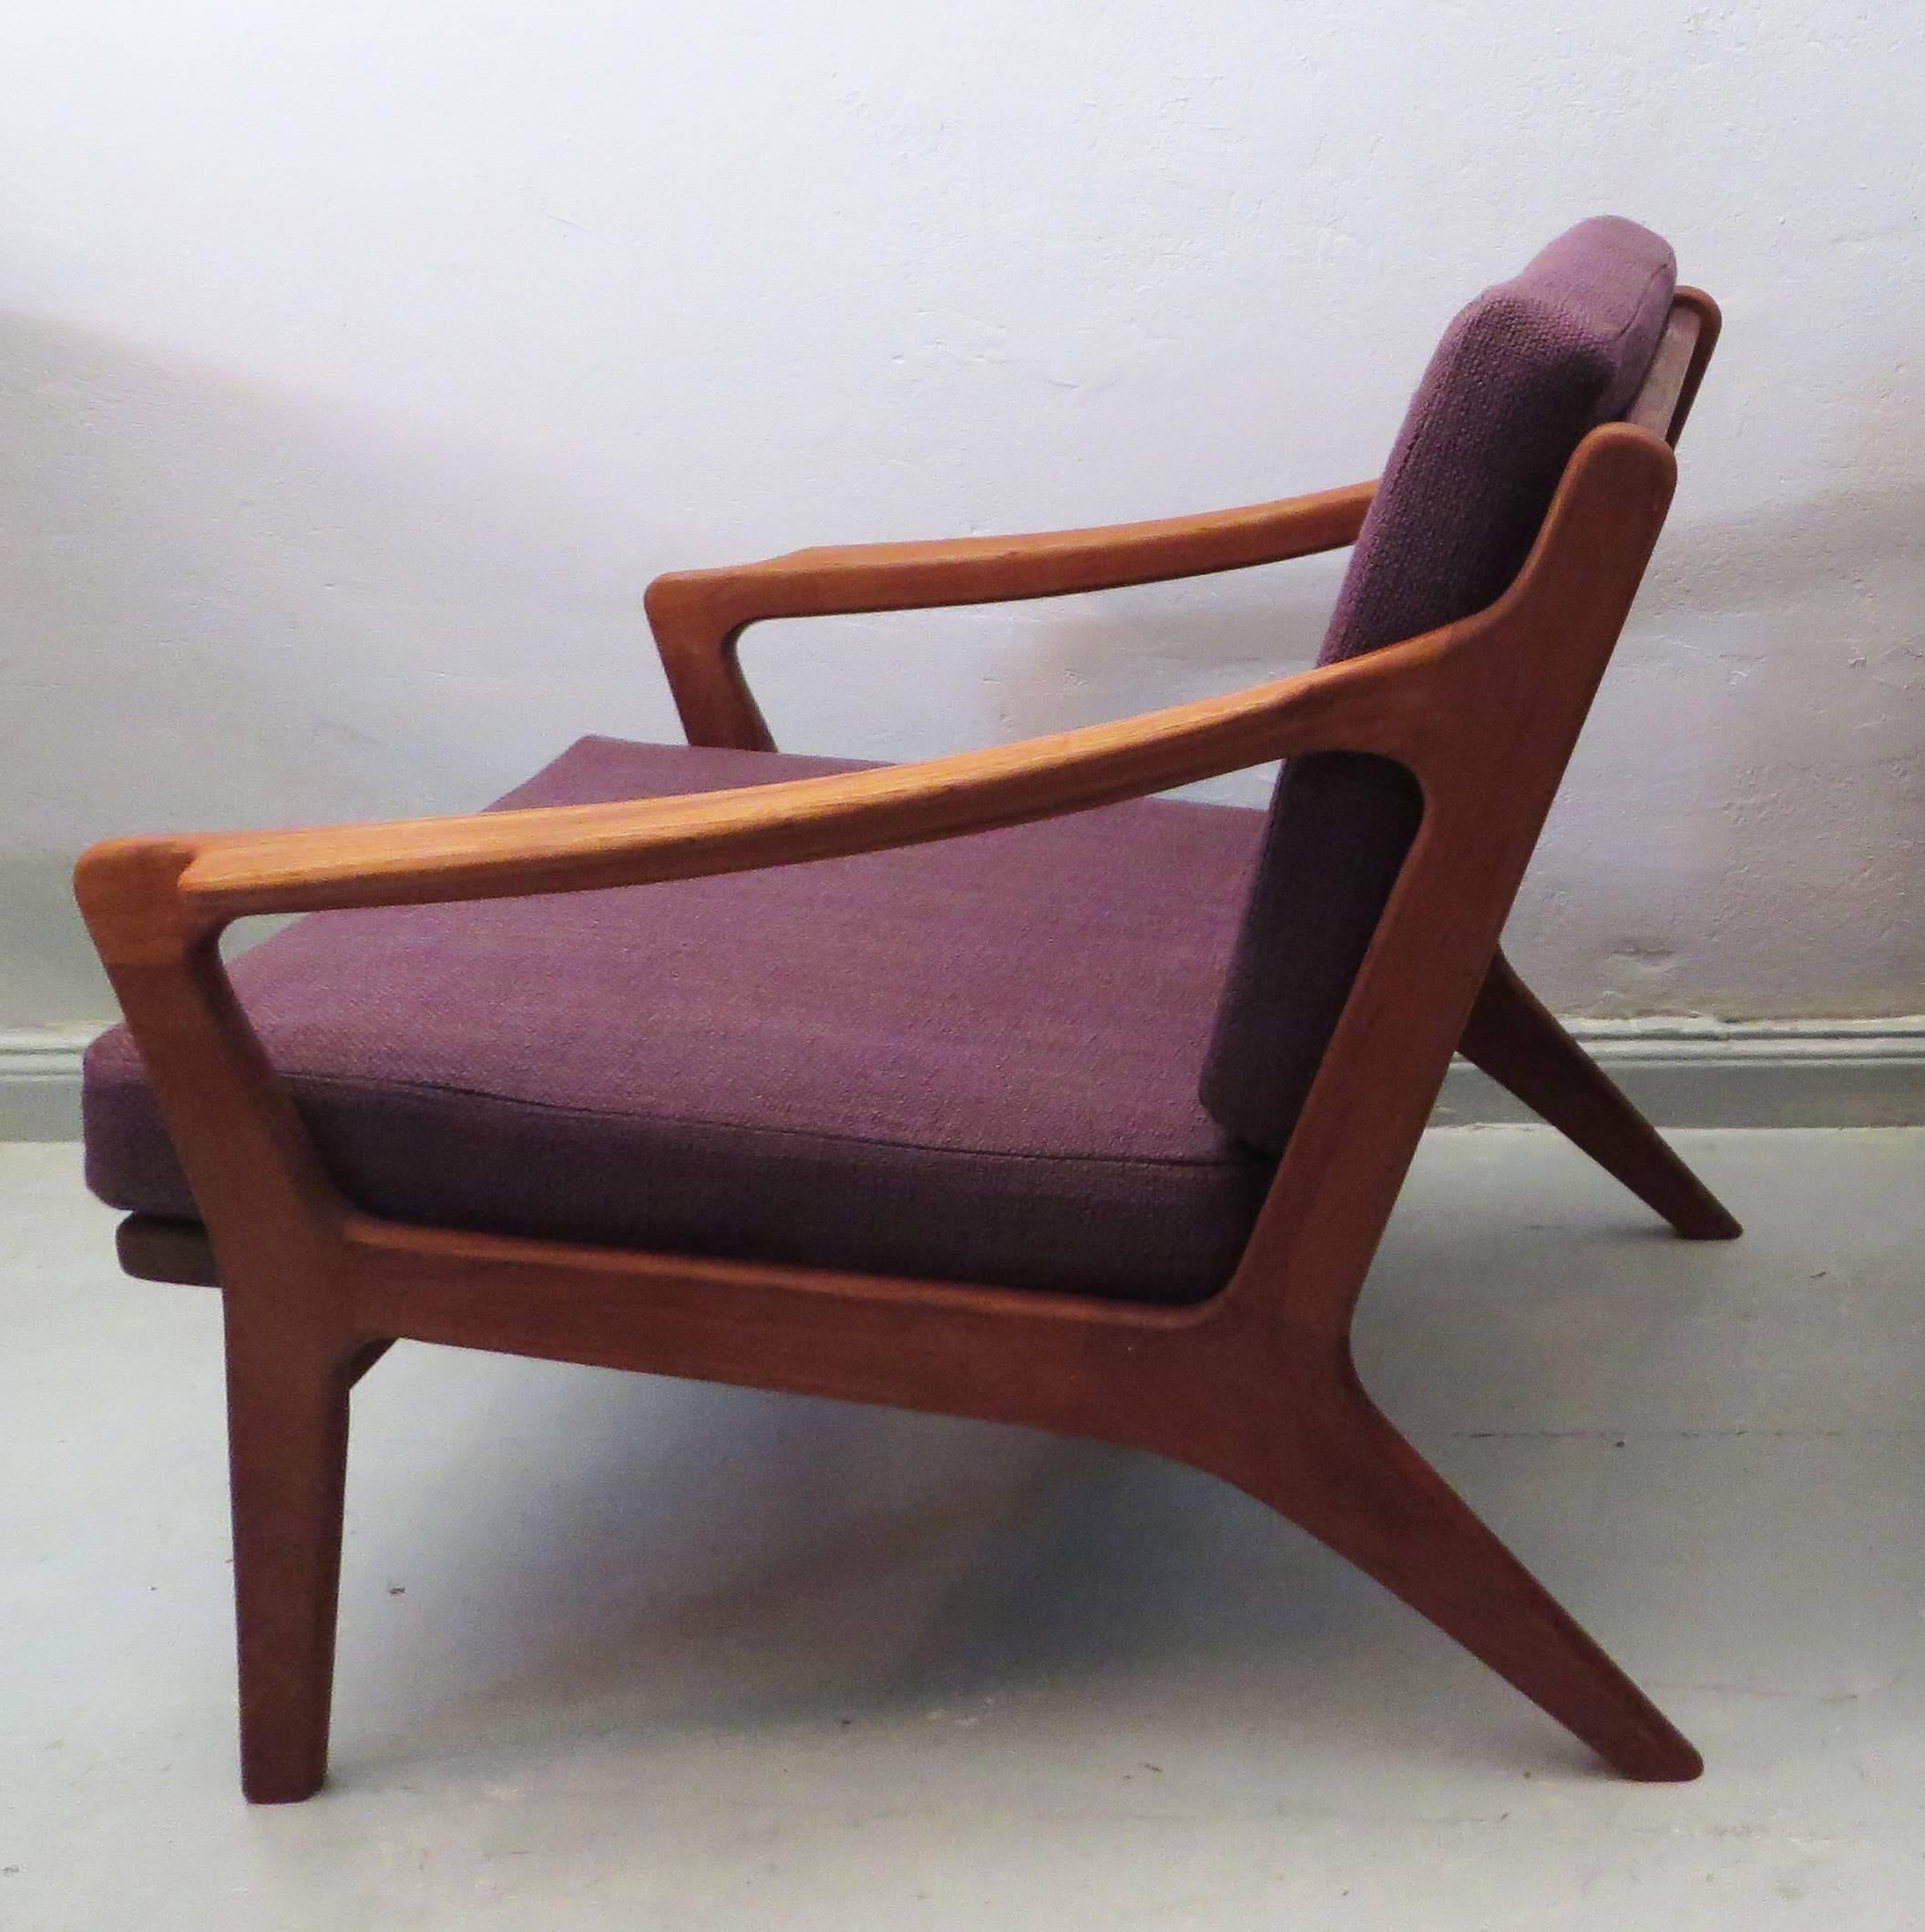 Elegant teak lounge chair from Denmark 1960s with a Fine and striking design. The cushion covers are recent but in 1960s style with a 